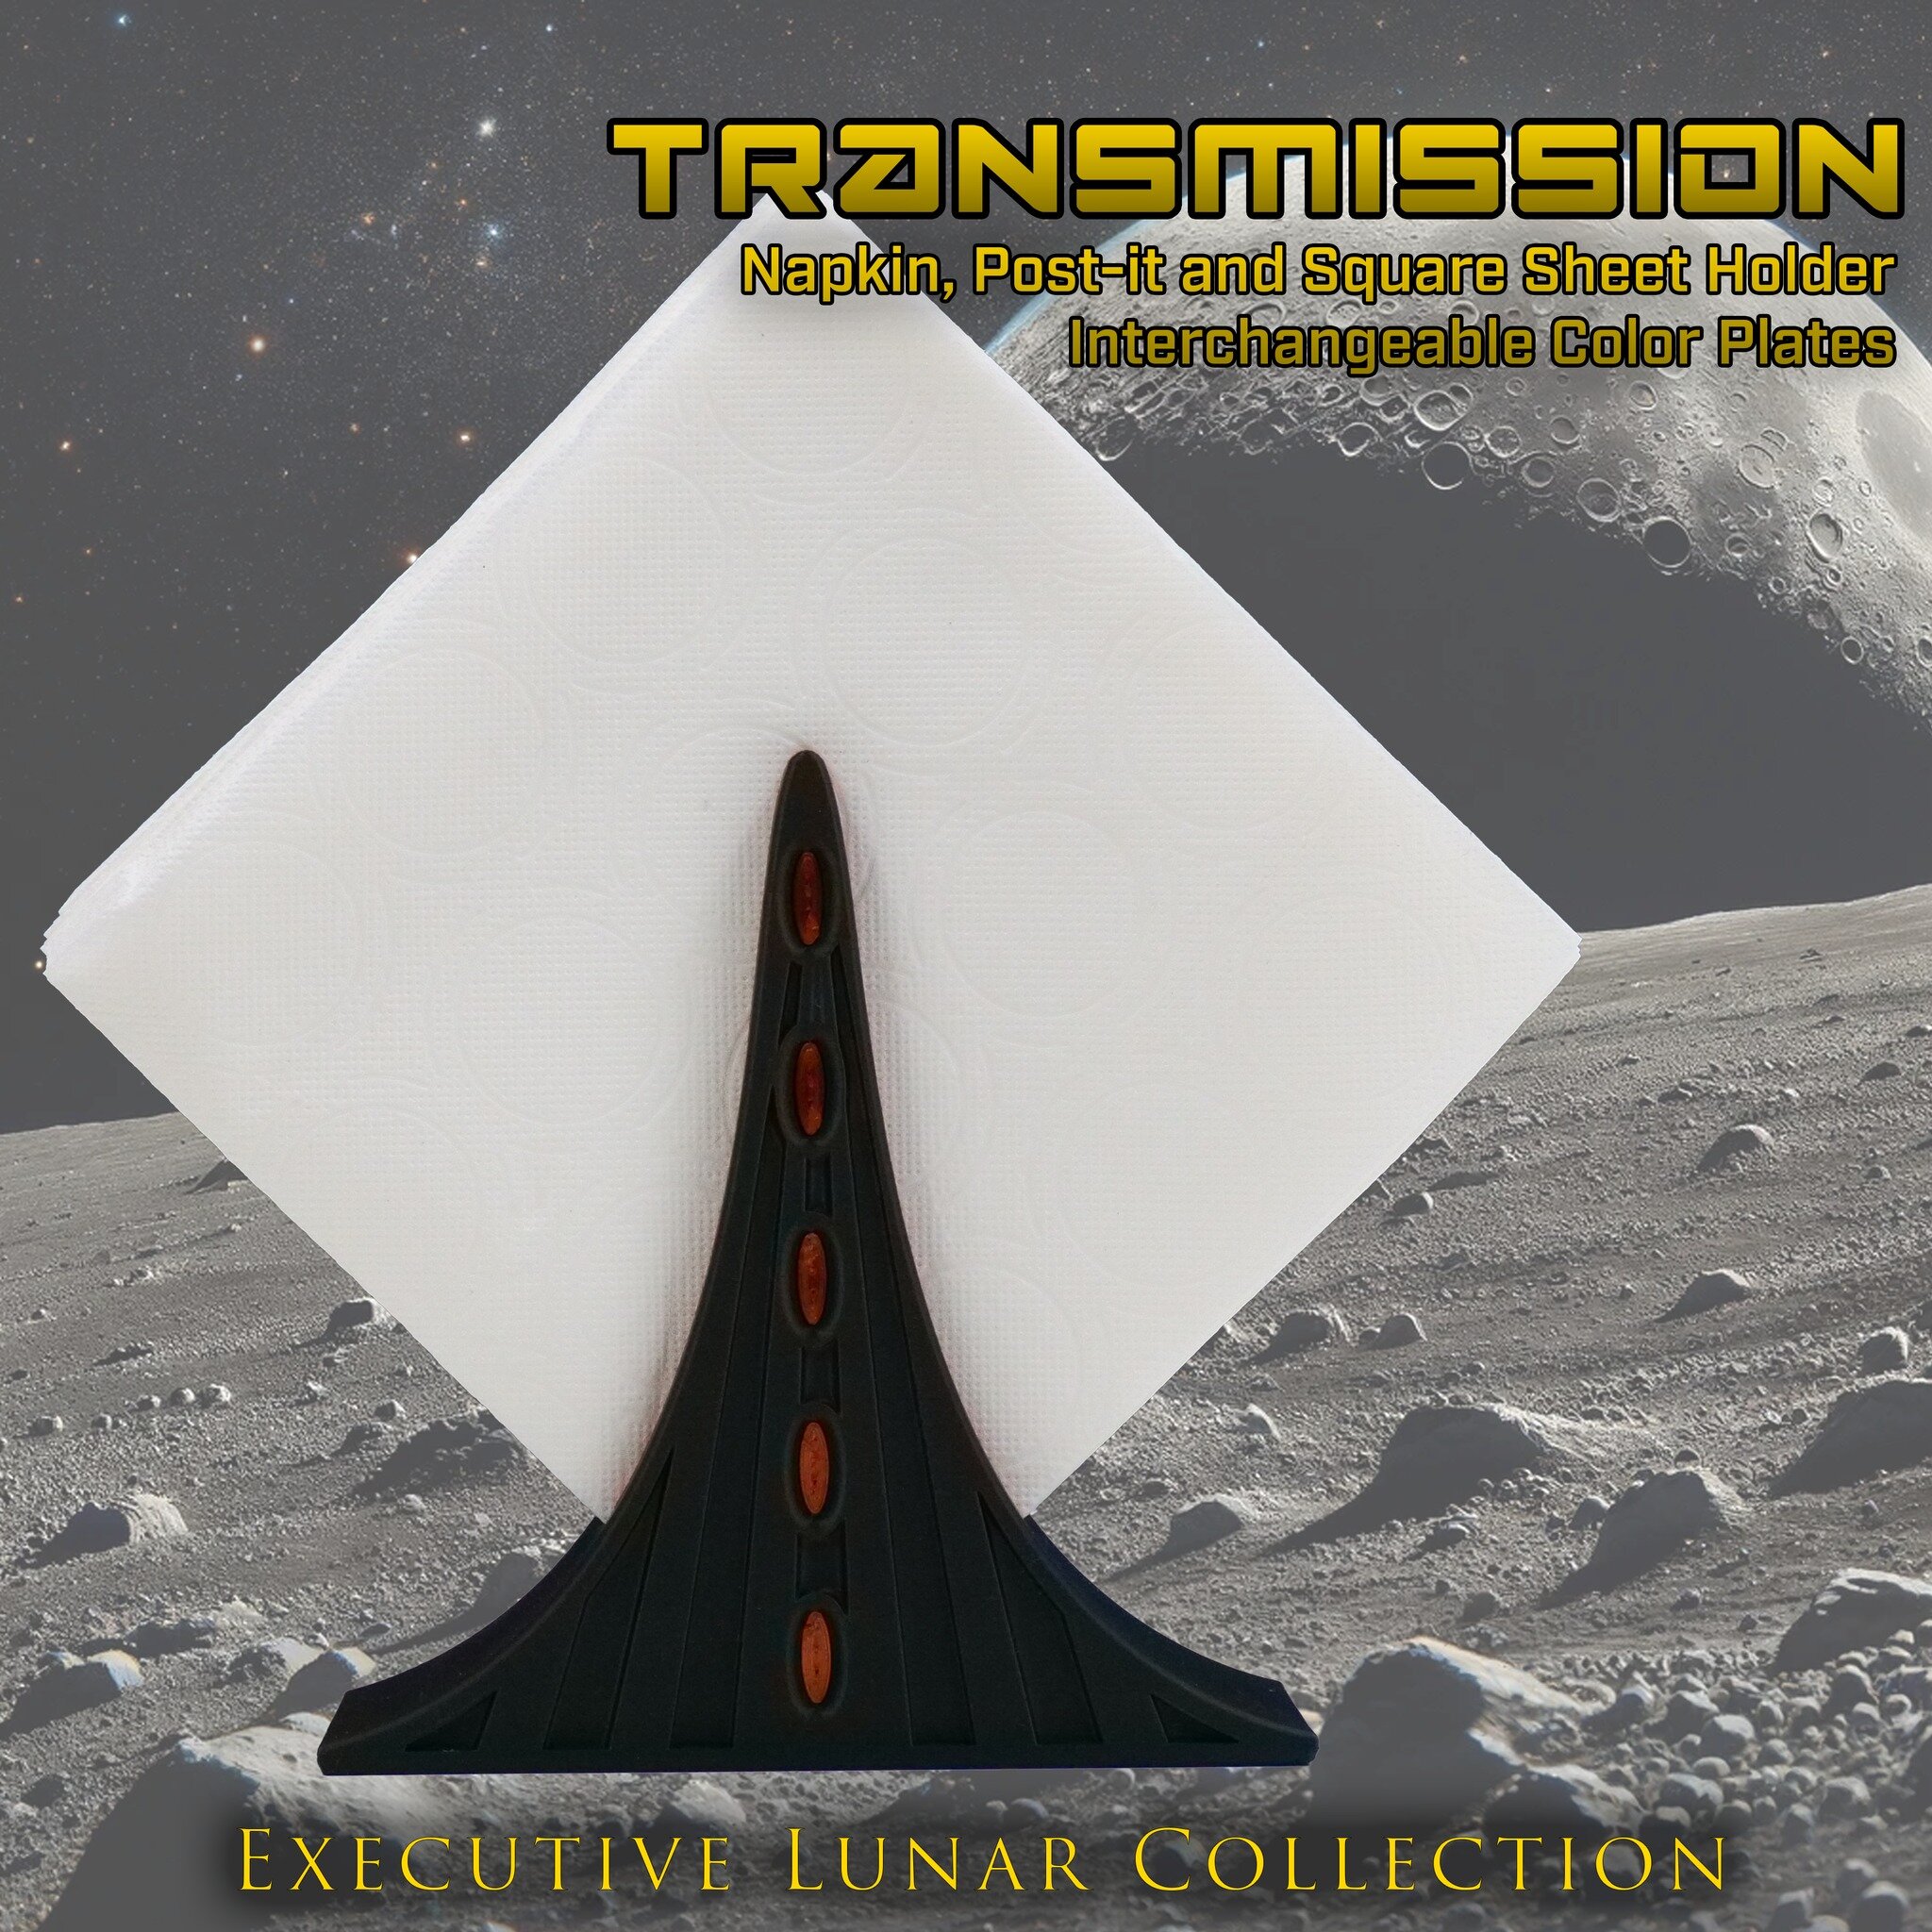 Ready to add some cosmic flair to your dining table? 
The Transmission Napkin Holder isn't just for cleanups; it's a signal of style from the moon to your home! 

Now available on @thangs3d

https://than.gs/m/1032723?affiliateCode=MAKERSMASHUP
#funct